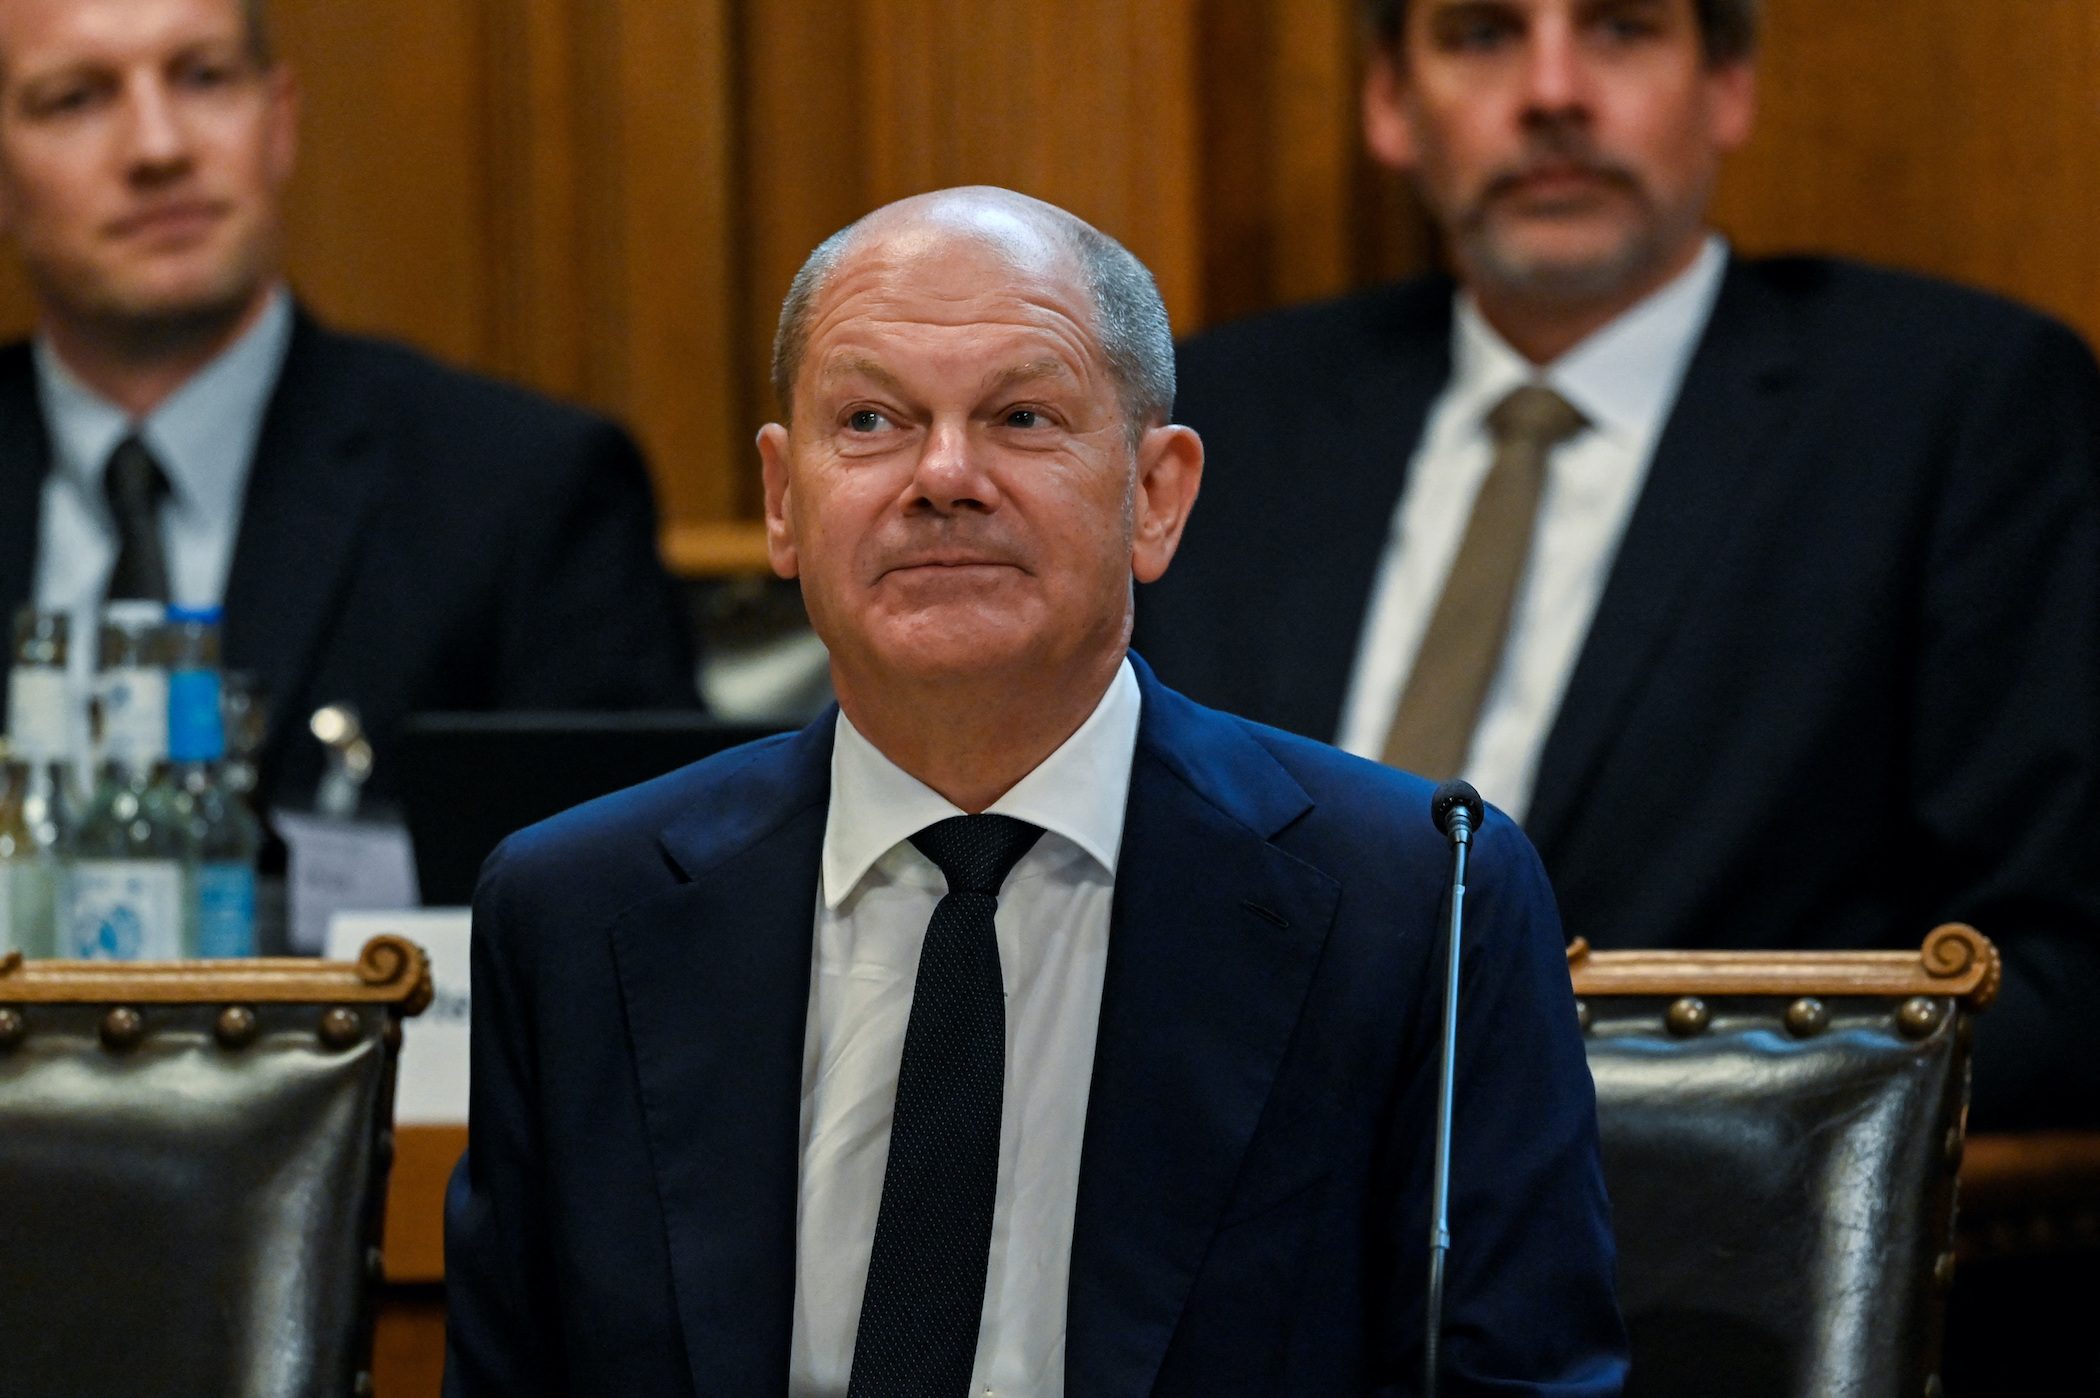 Grilling over Scholz’s handling of multibillion-euro tax fraud ends in standoff